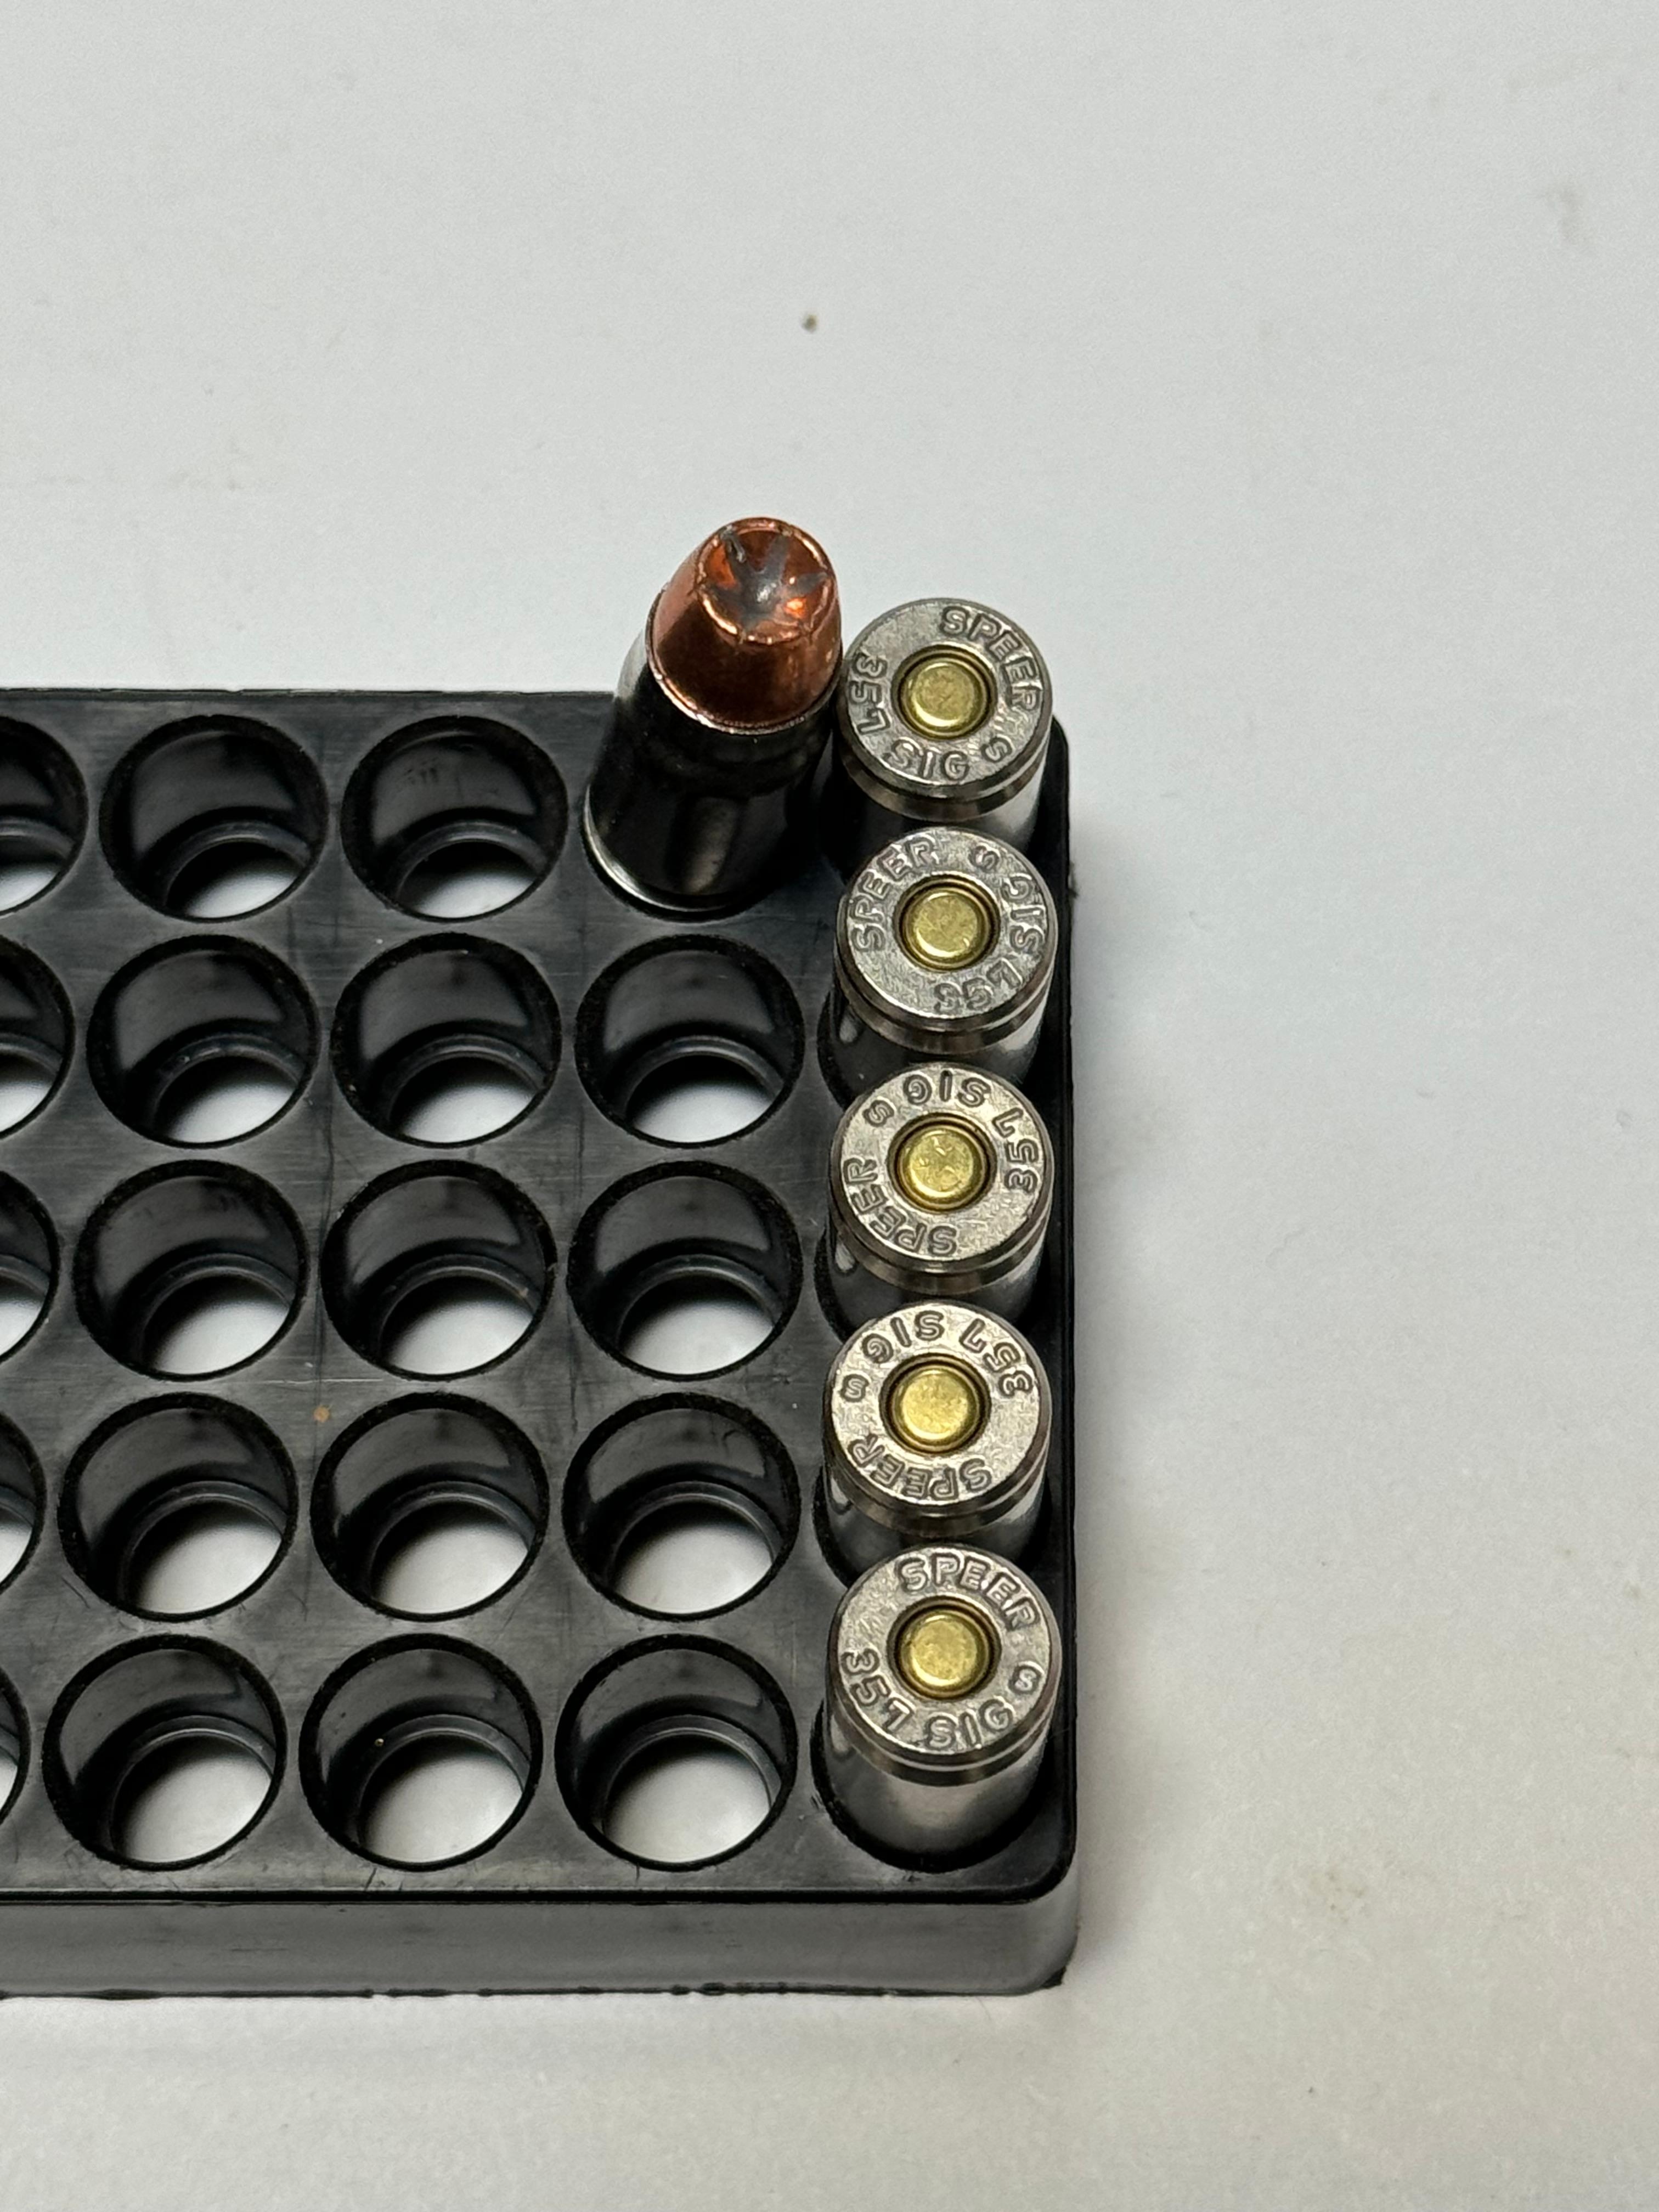 Factory New 107rds. of .357 SIG JHP Personal Defense Ammunition